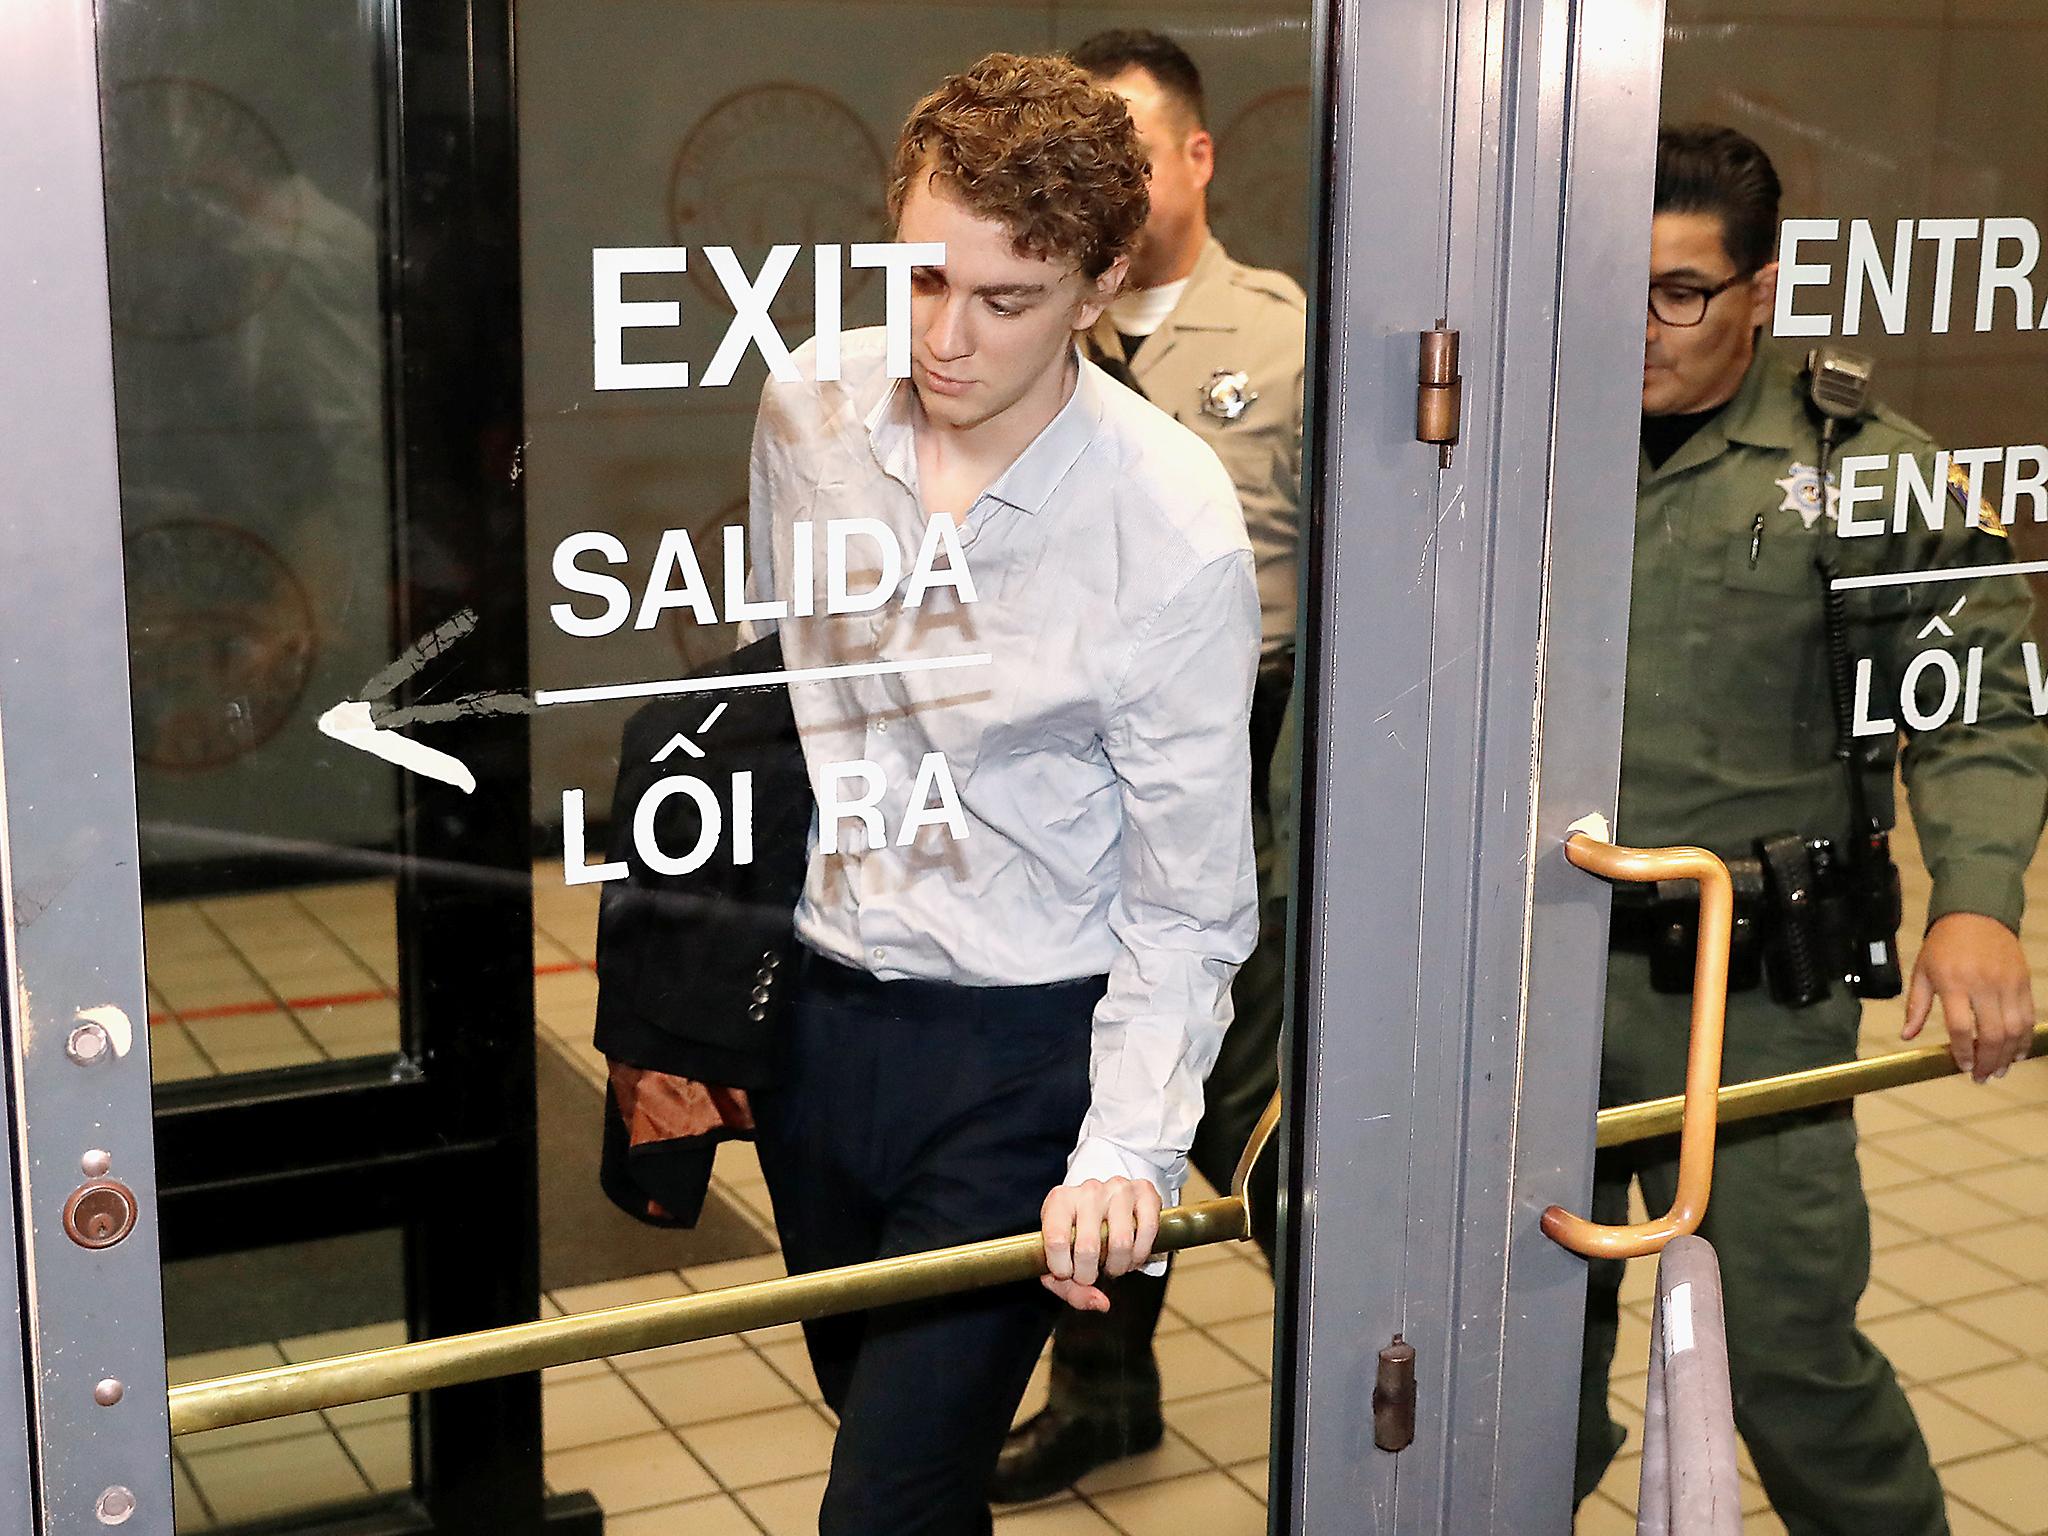 Brock Turner, the former Stanford swimmer convicted of sexually assaulting an unconscious woman, leaves the Santa Clara County Jail in San Jose, California